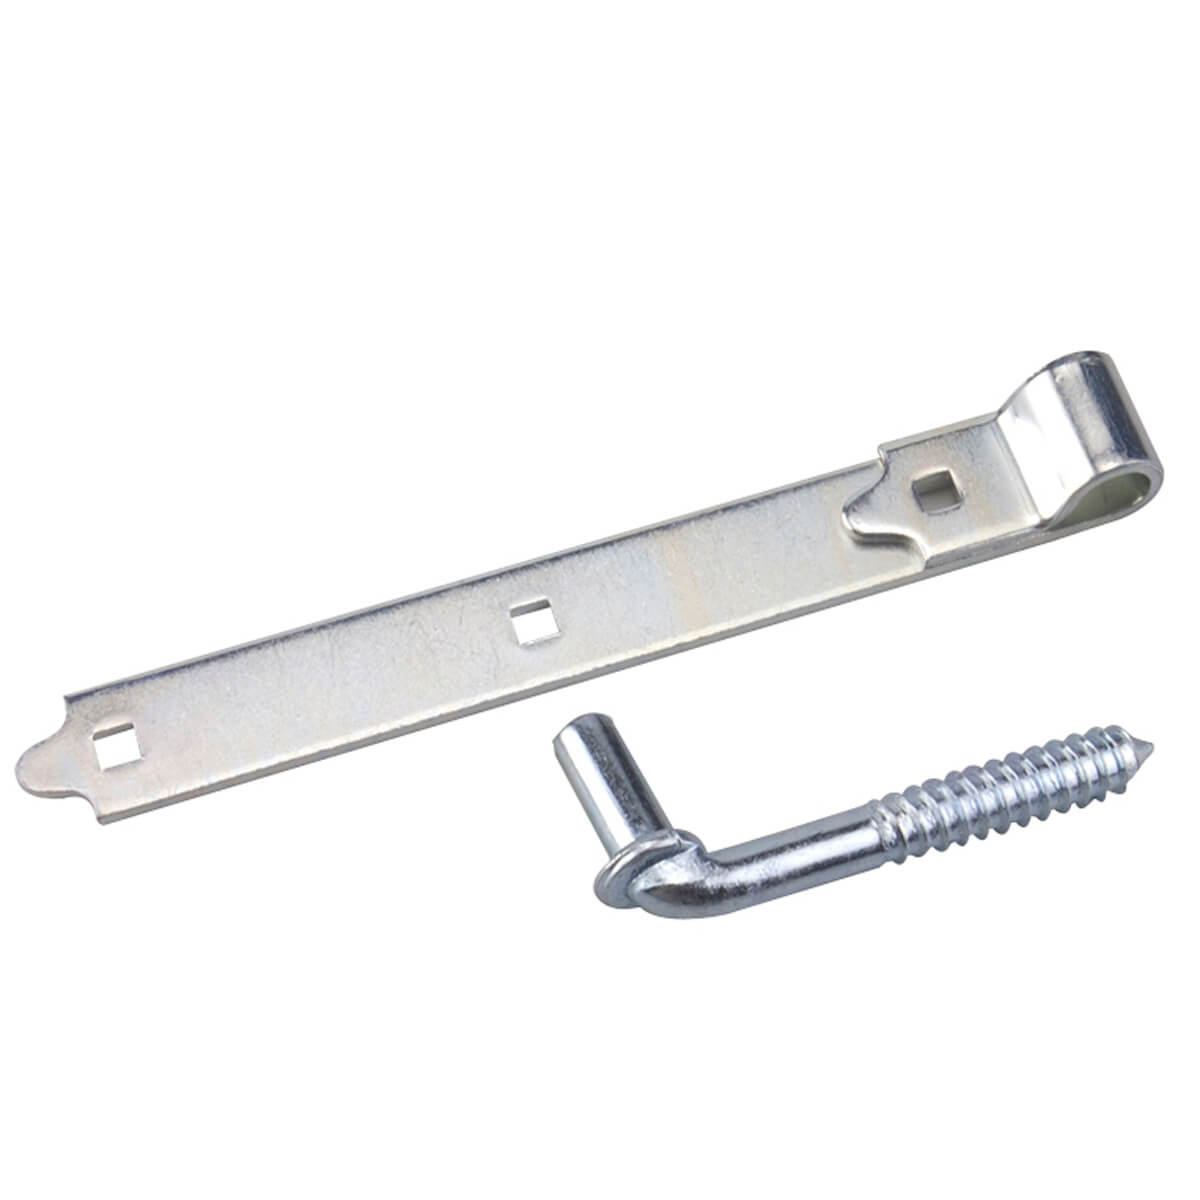 Screw Hook with Strap Hinge  - 10-in